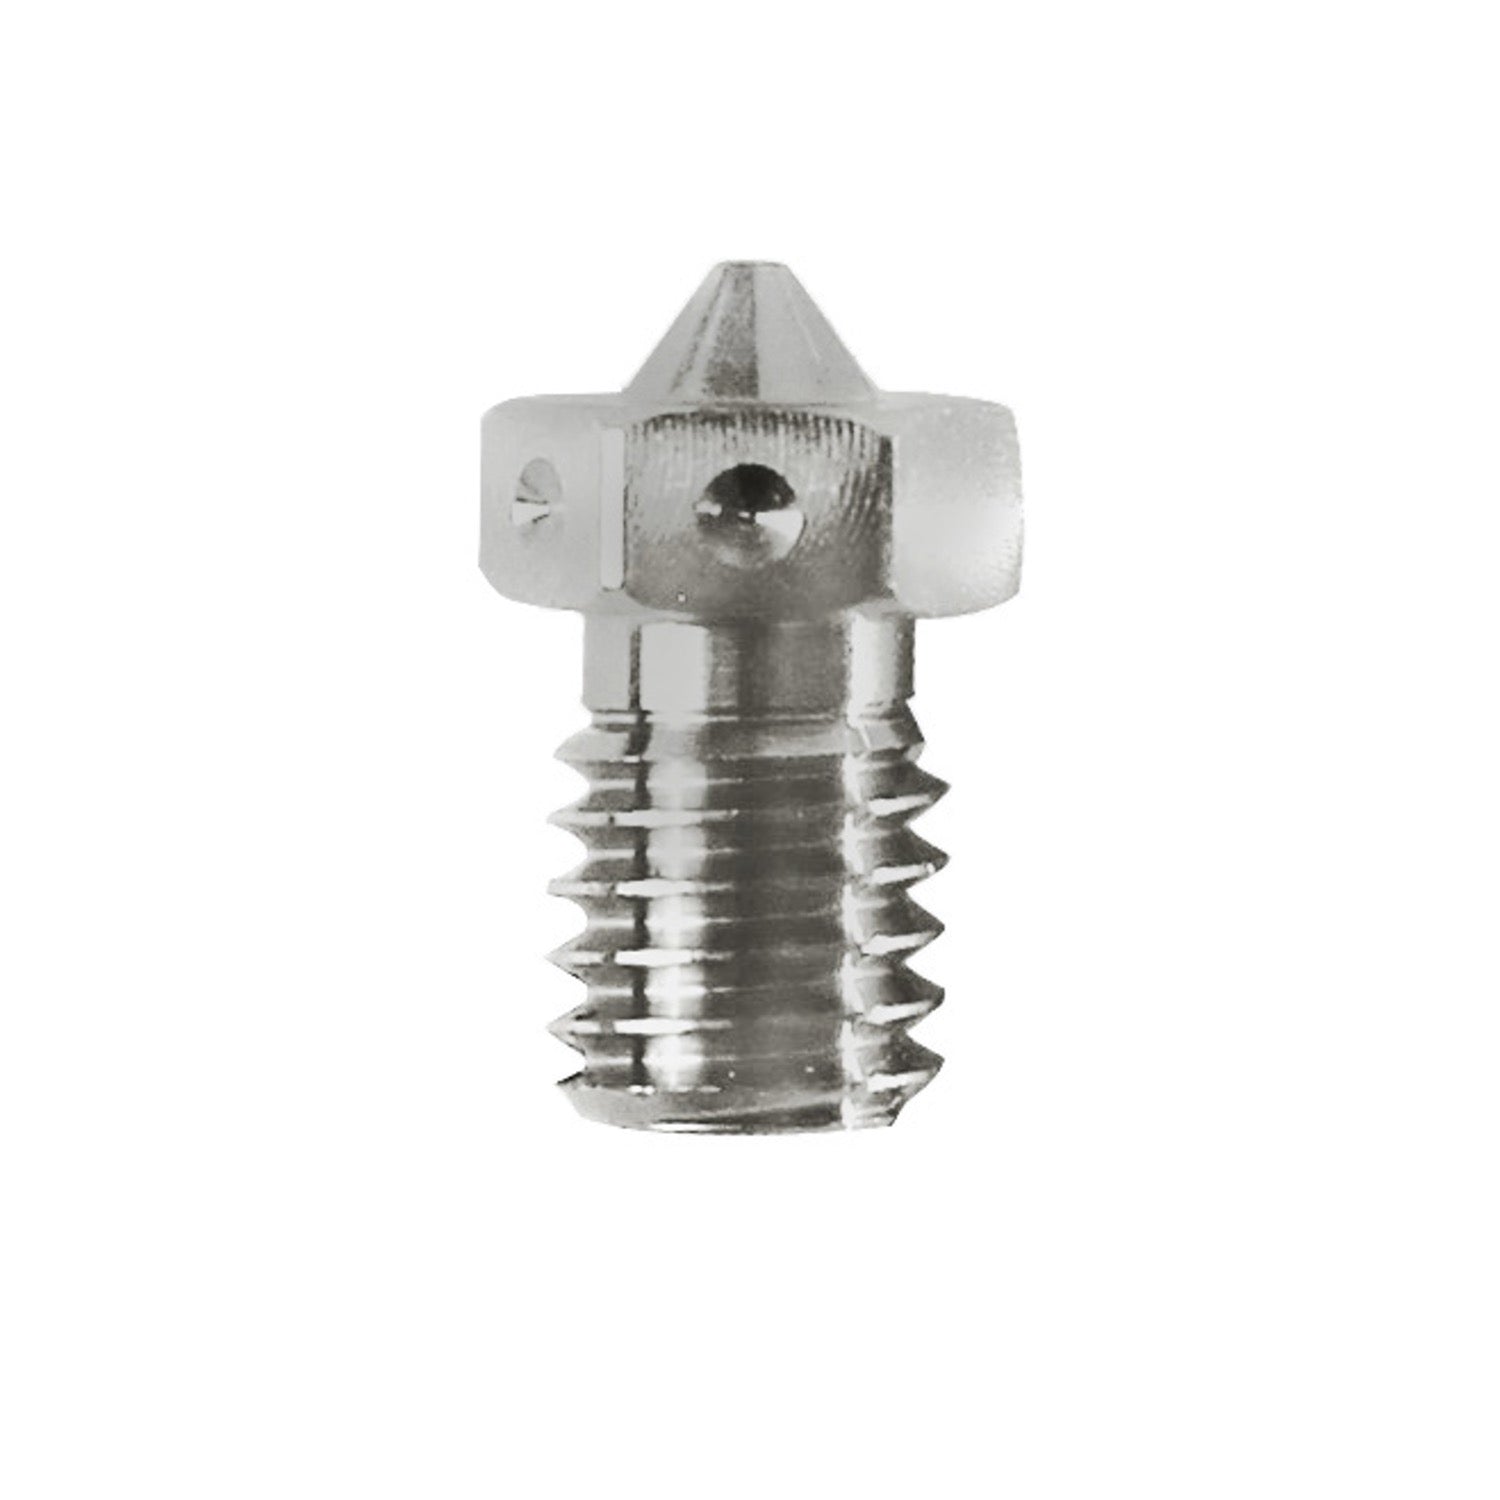 E3D Stainless Steel V6 Nozzle - 1.75mm x 0.40mm